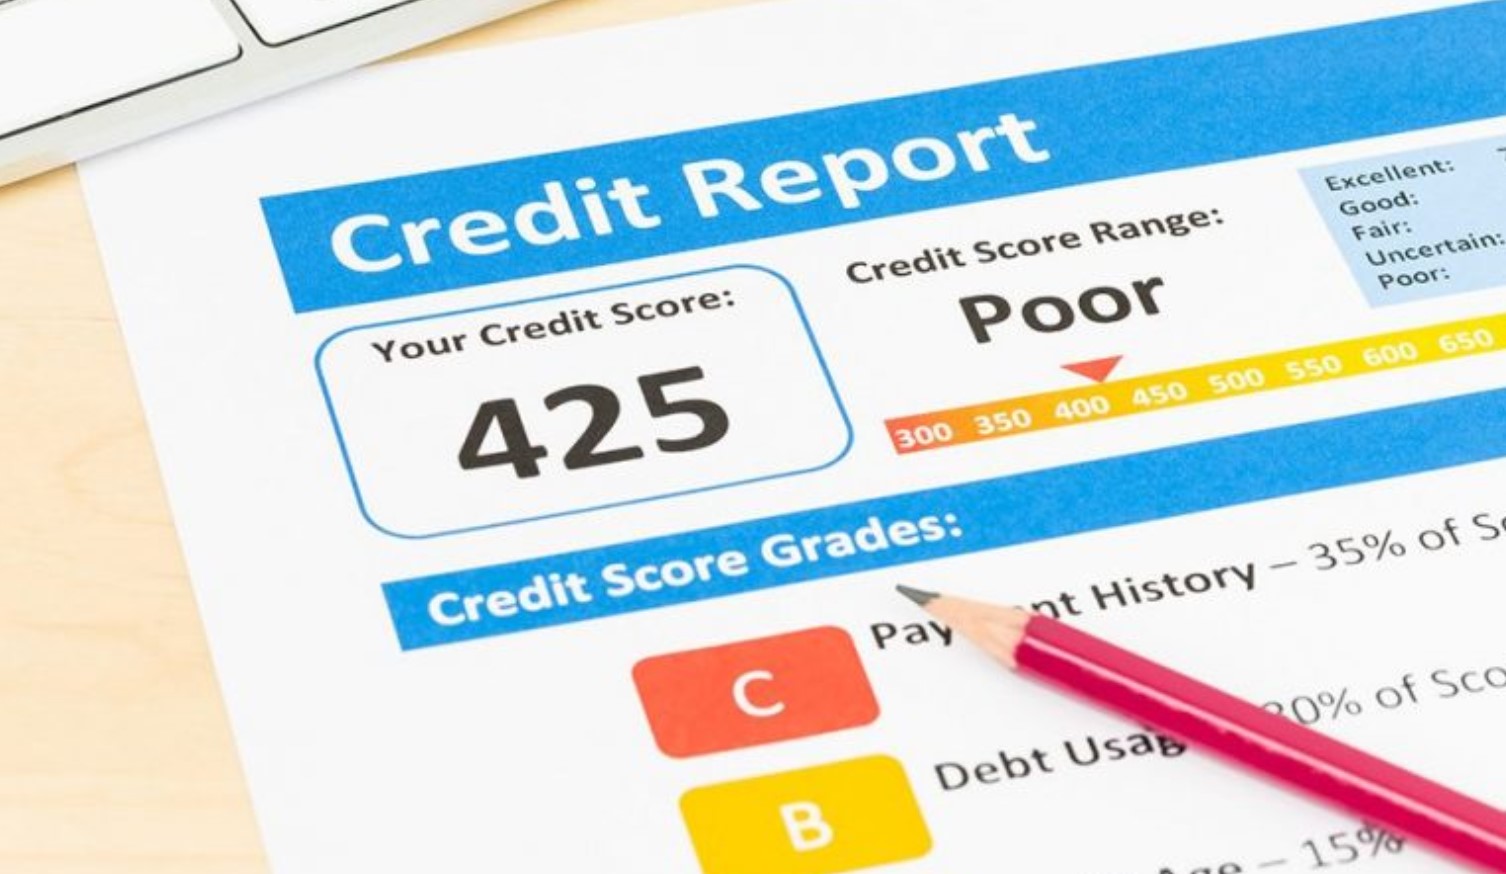  A credit report with a low credit score of 425, showing the consequences of having a poor credit score.